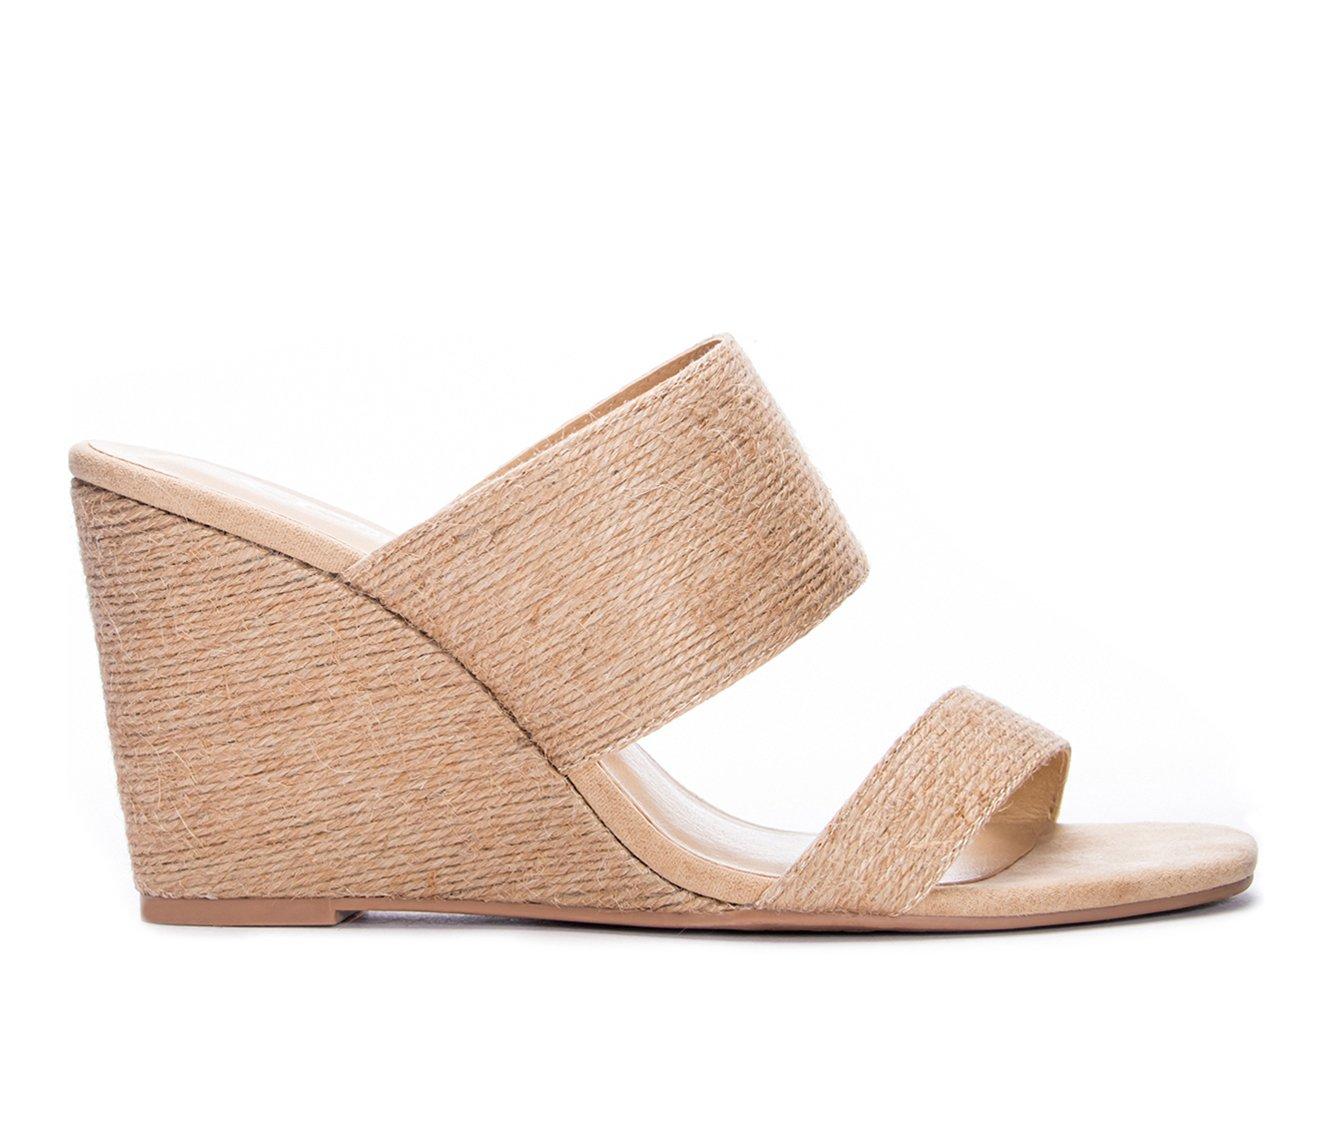 Women's CL By Laundry Five Star Wedges